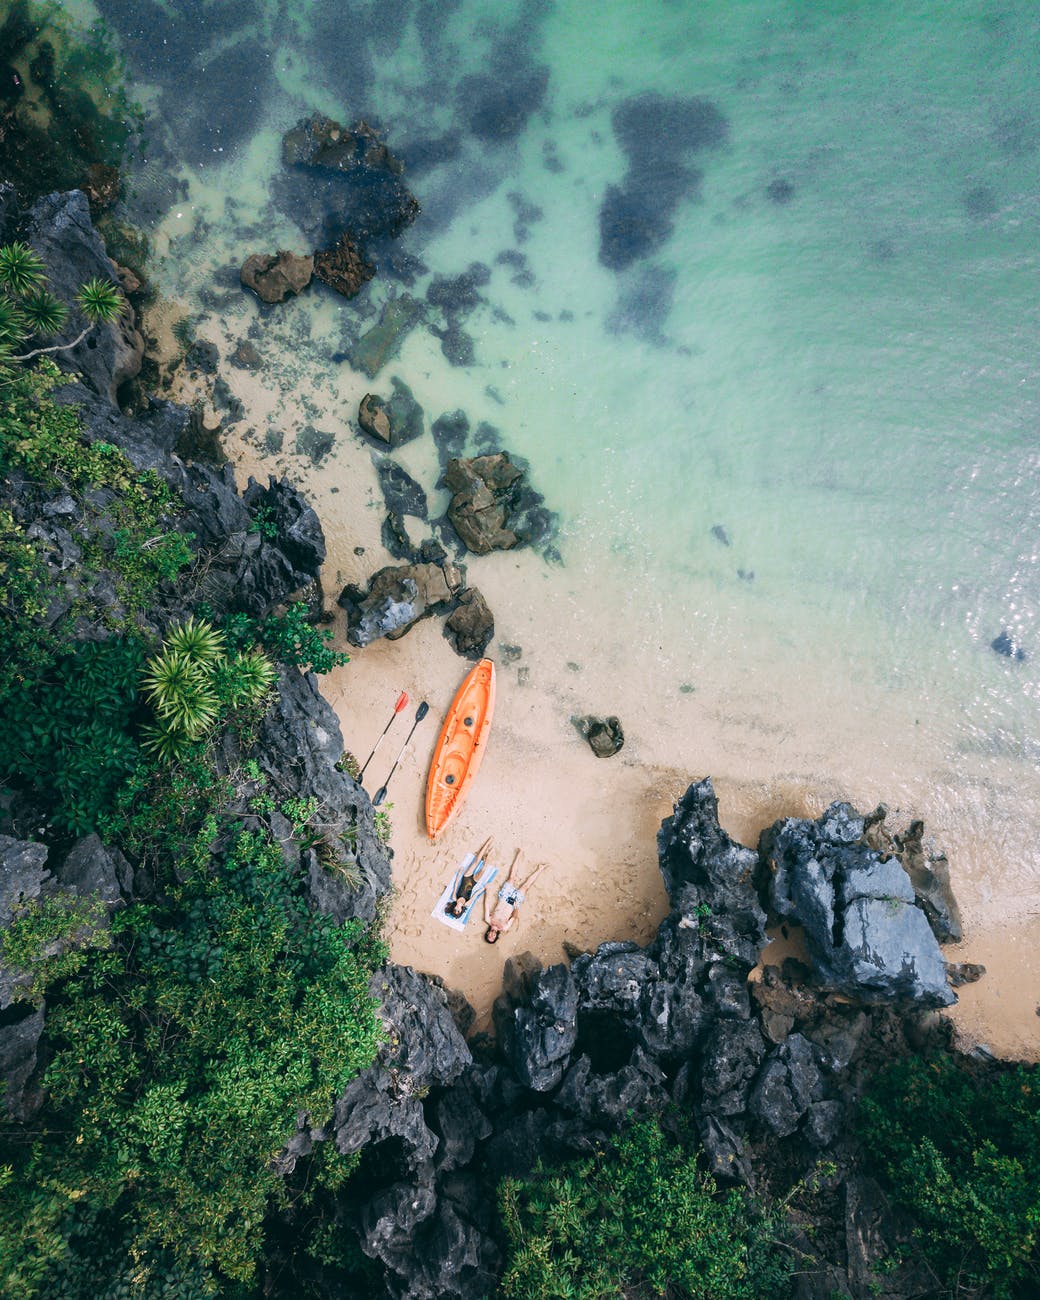 aerial view of people on beach